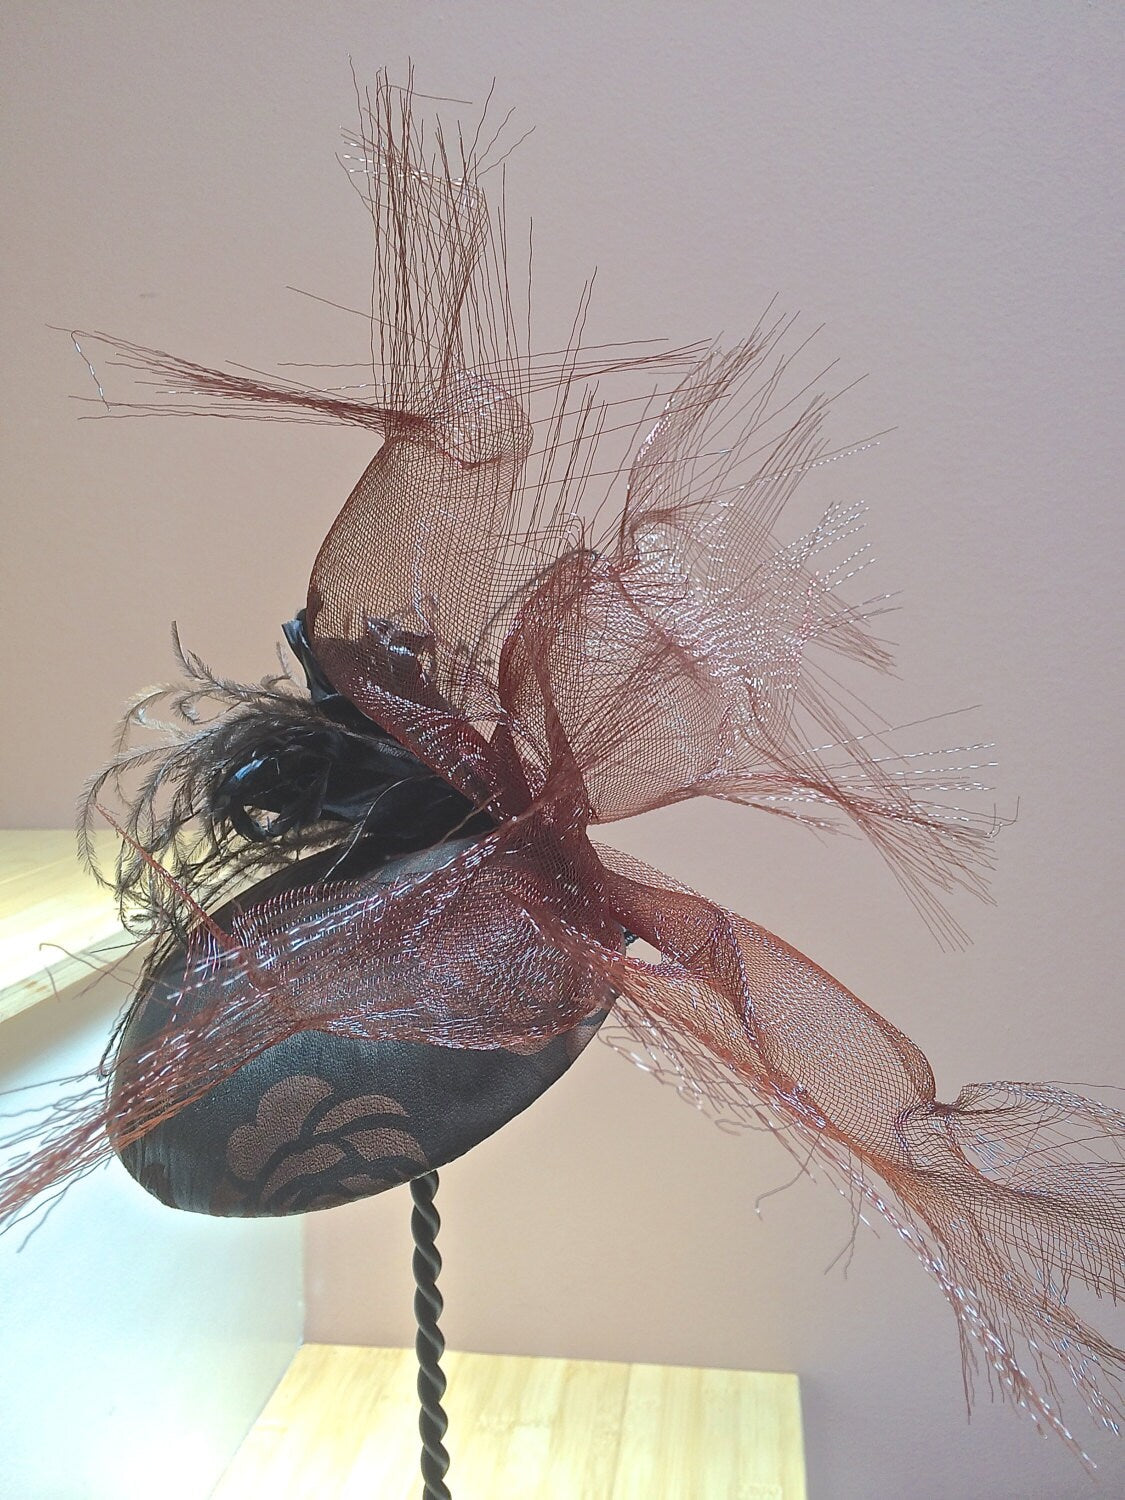 Black and tan leather fascinator, Goth headpiece, Royal Ascot hat, Race track hat-Cocktail Hat-Crinoline and Feathers-Goth Headpiece-Bespoke